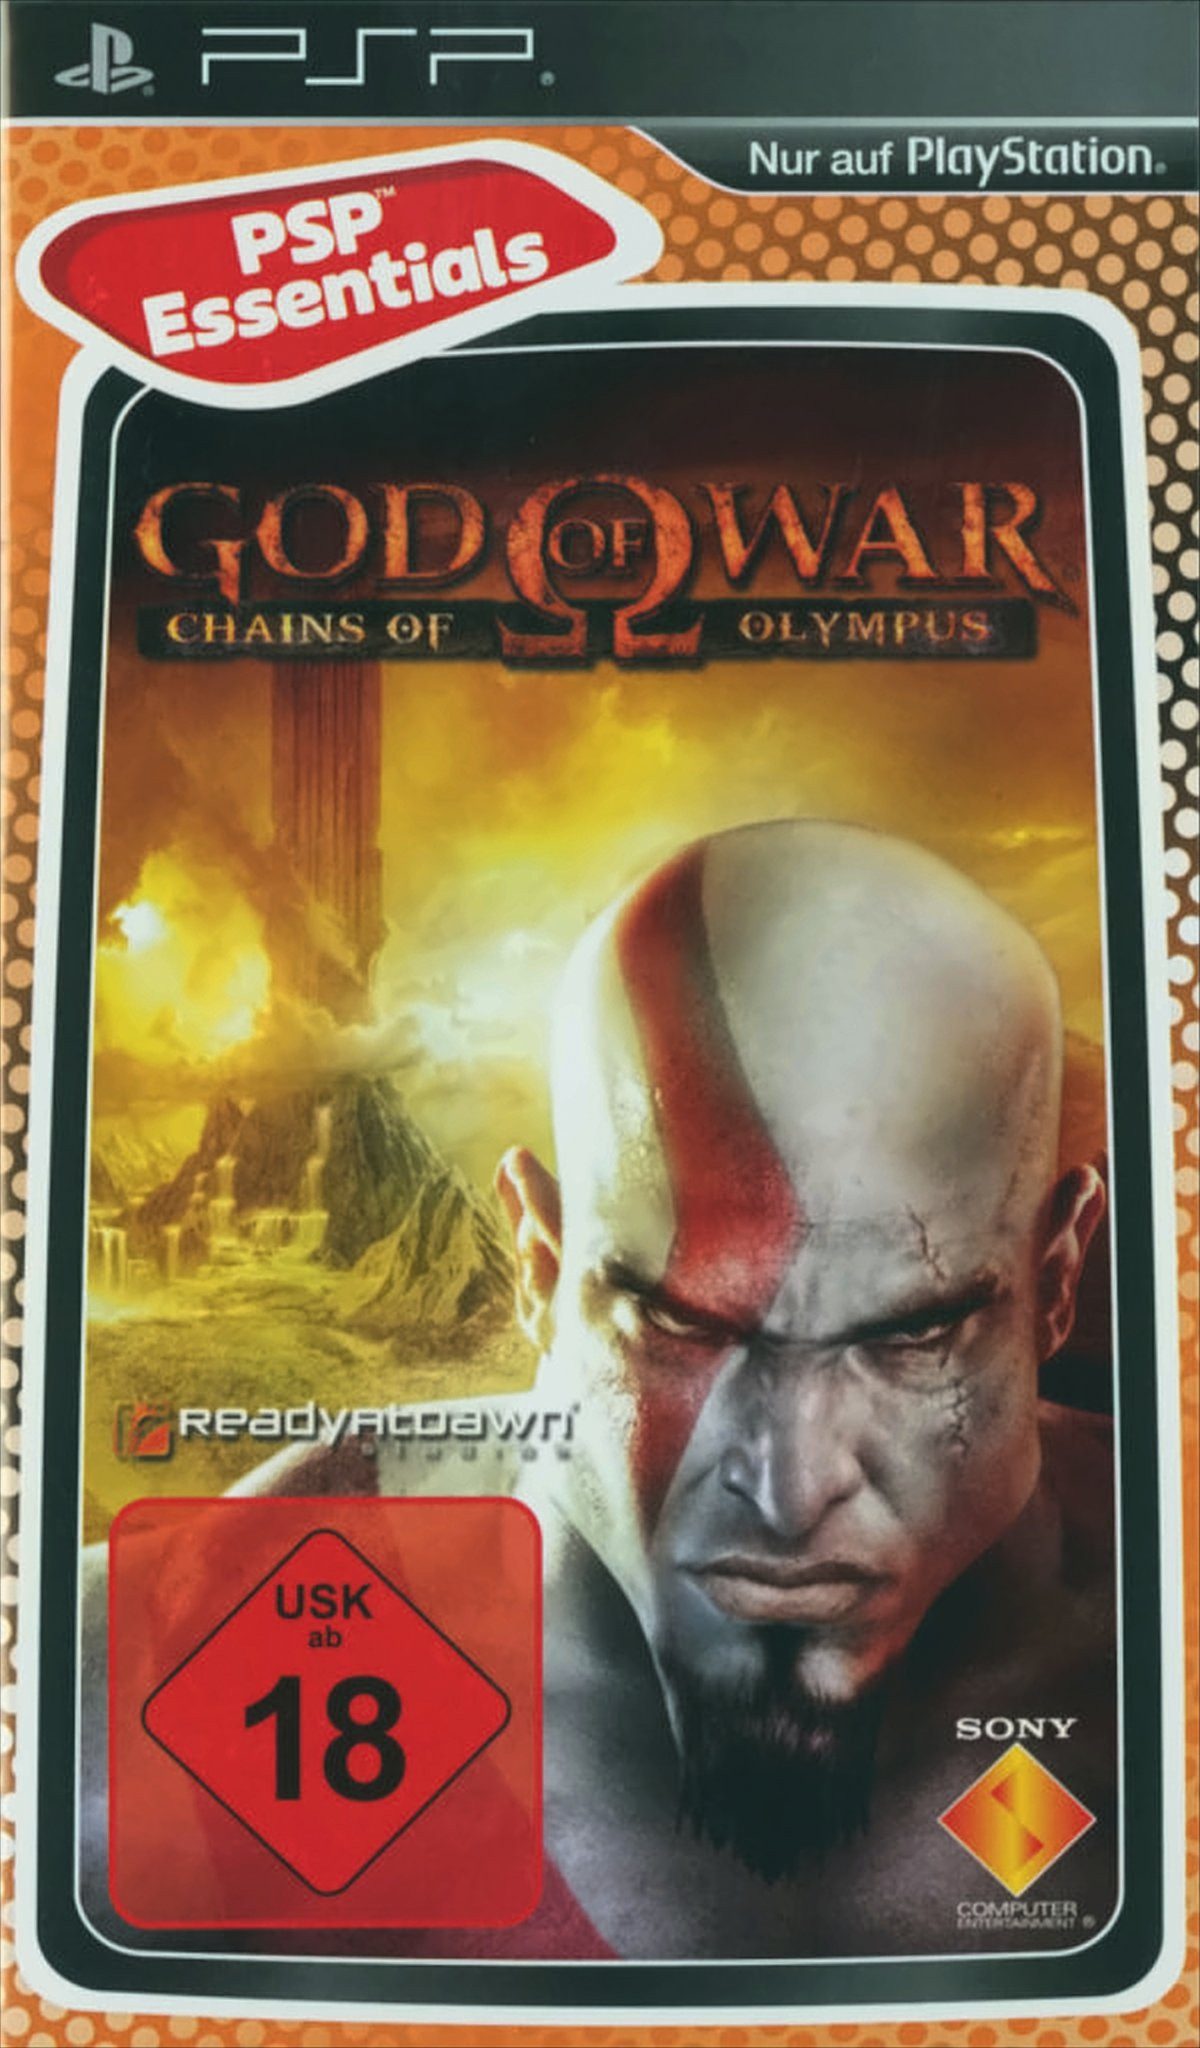 God of War: Chains of Olympus Playstation PSP